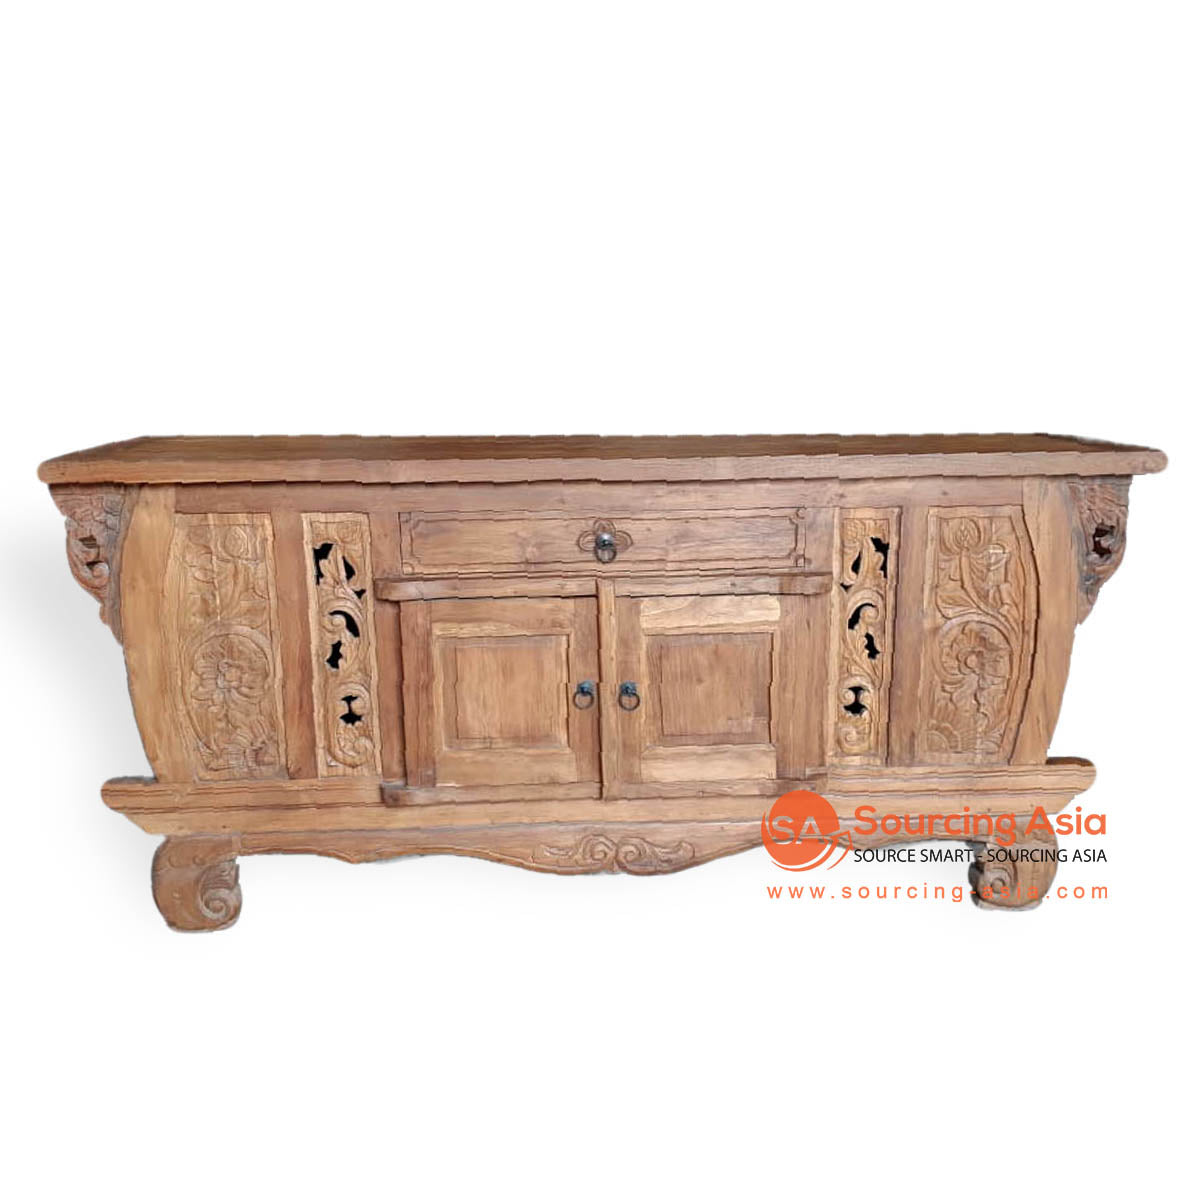 LAC039-2 NATURAL RECYCLED TEAK WOOD TWO DOORS AND ONE DRAWER CARVED BUFFET